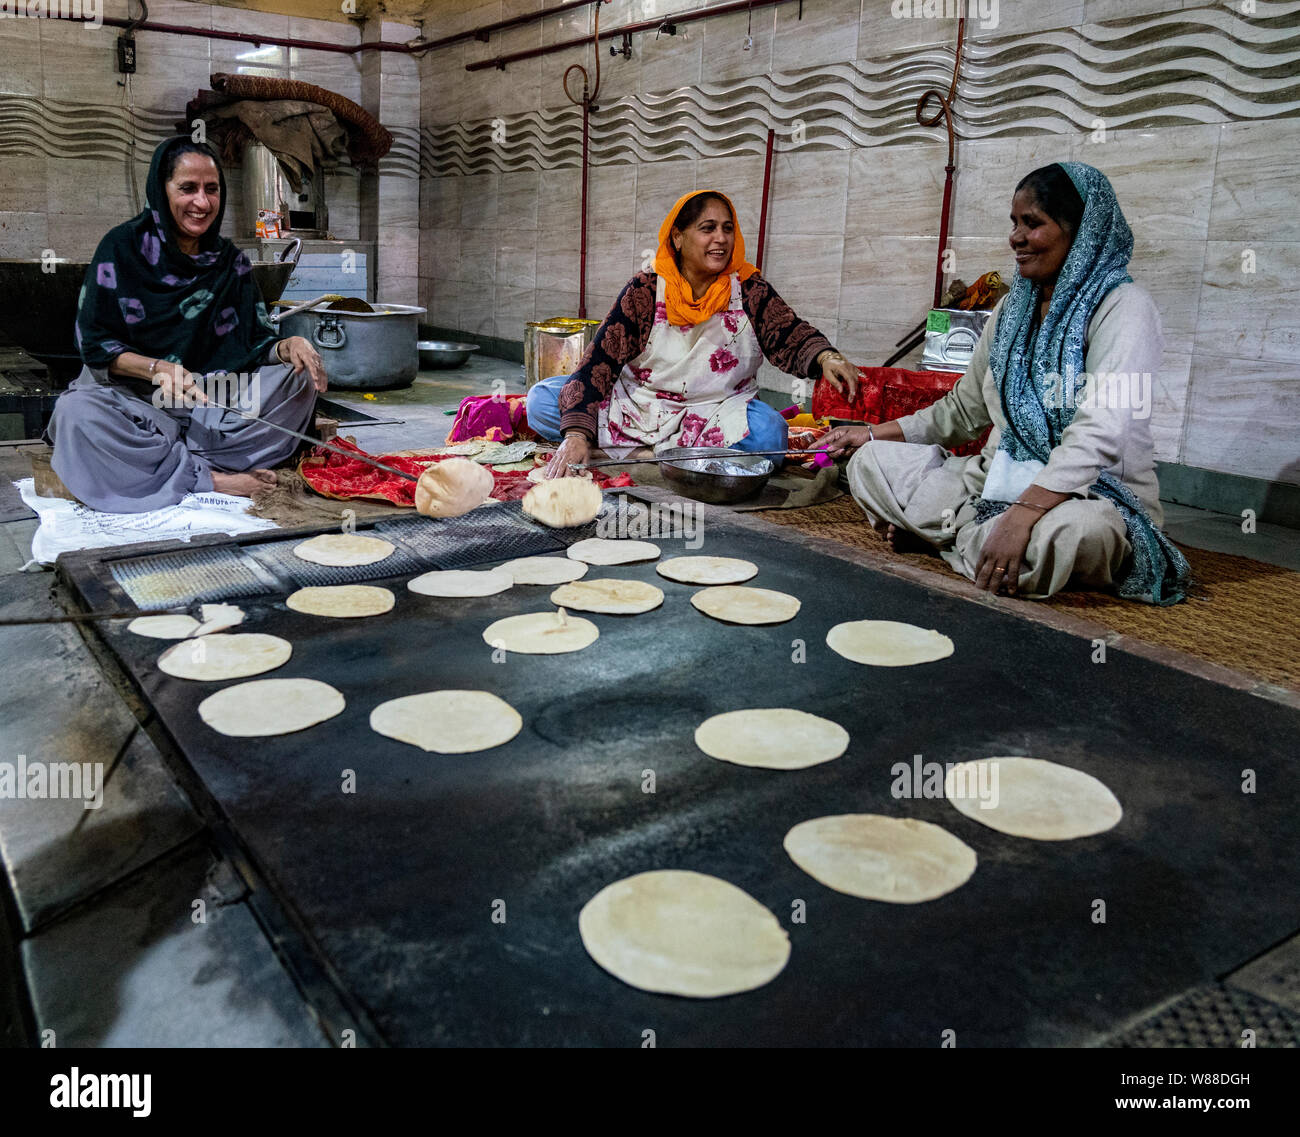 https://c8.alamy.com/comp/W88DGH/new-dehli-india-feb-20-2018-women-prepare-pan-bread-for-free-meals-for-sikh-visitors-to-temple-W88DGH.jpg